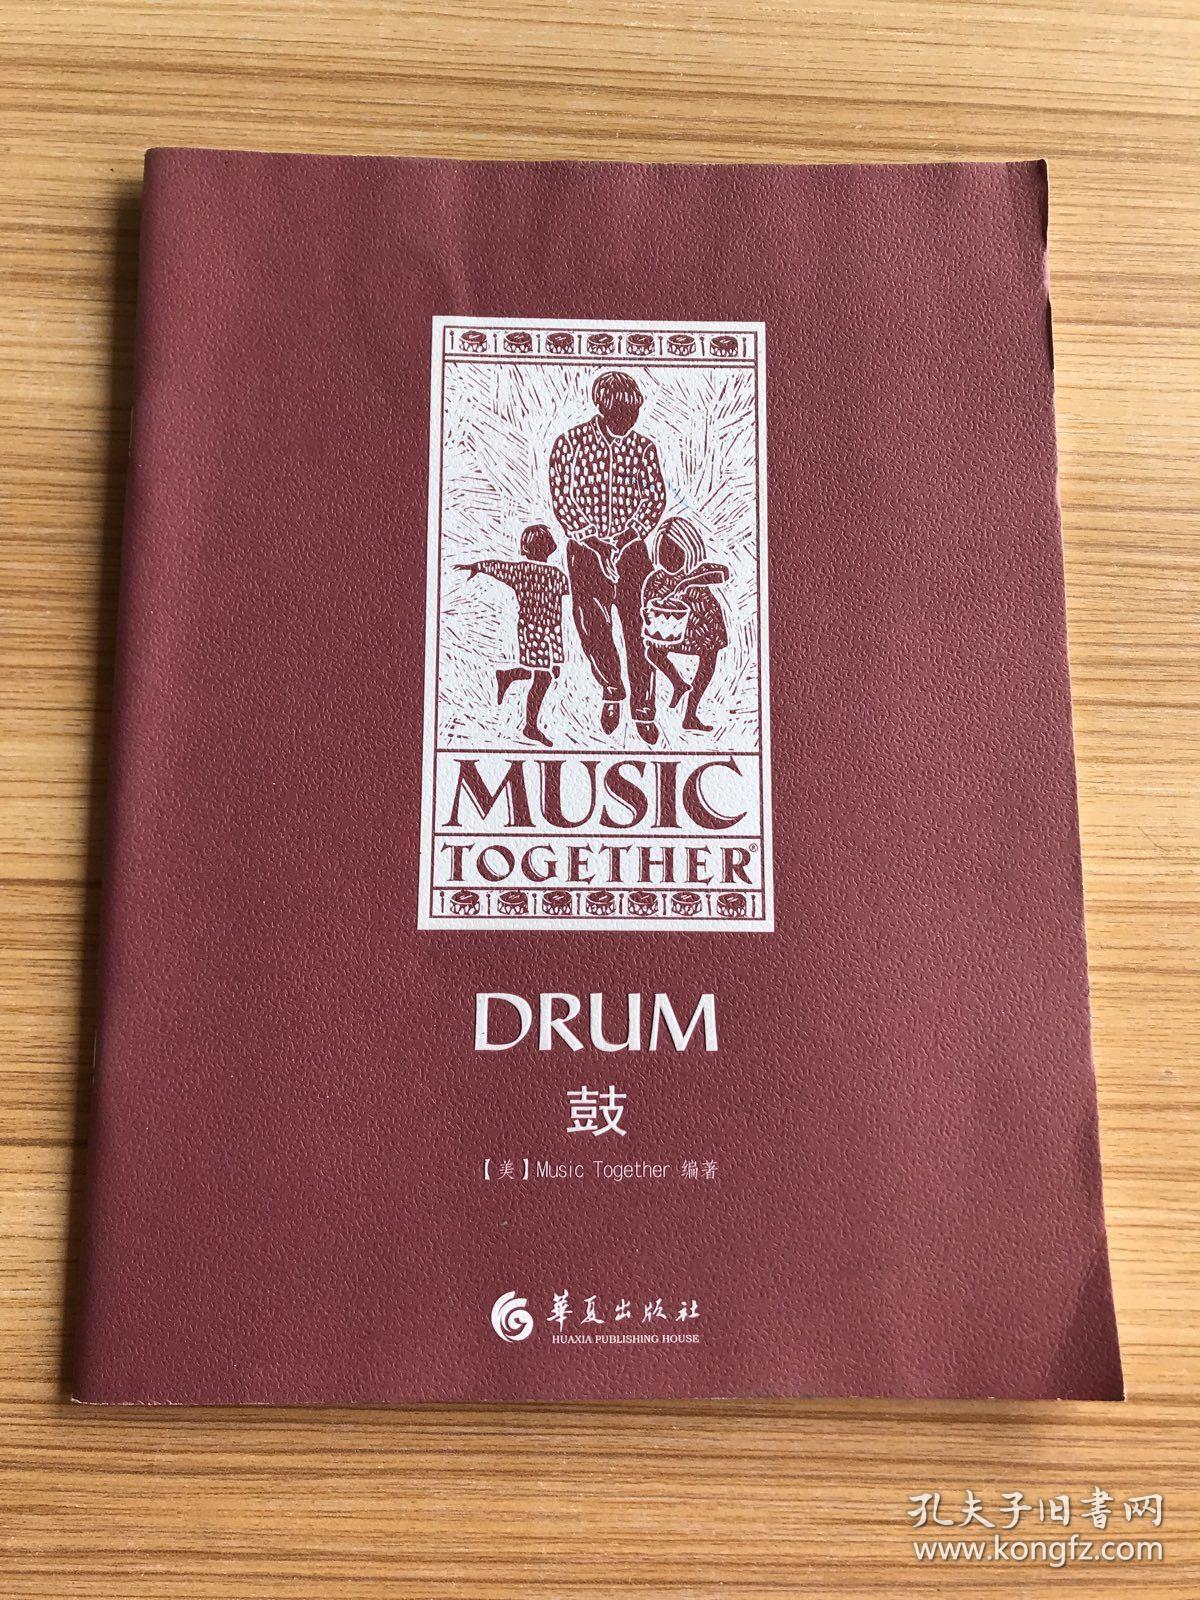 Music together drum 鼓